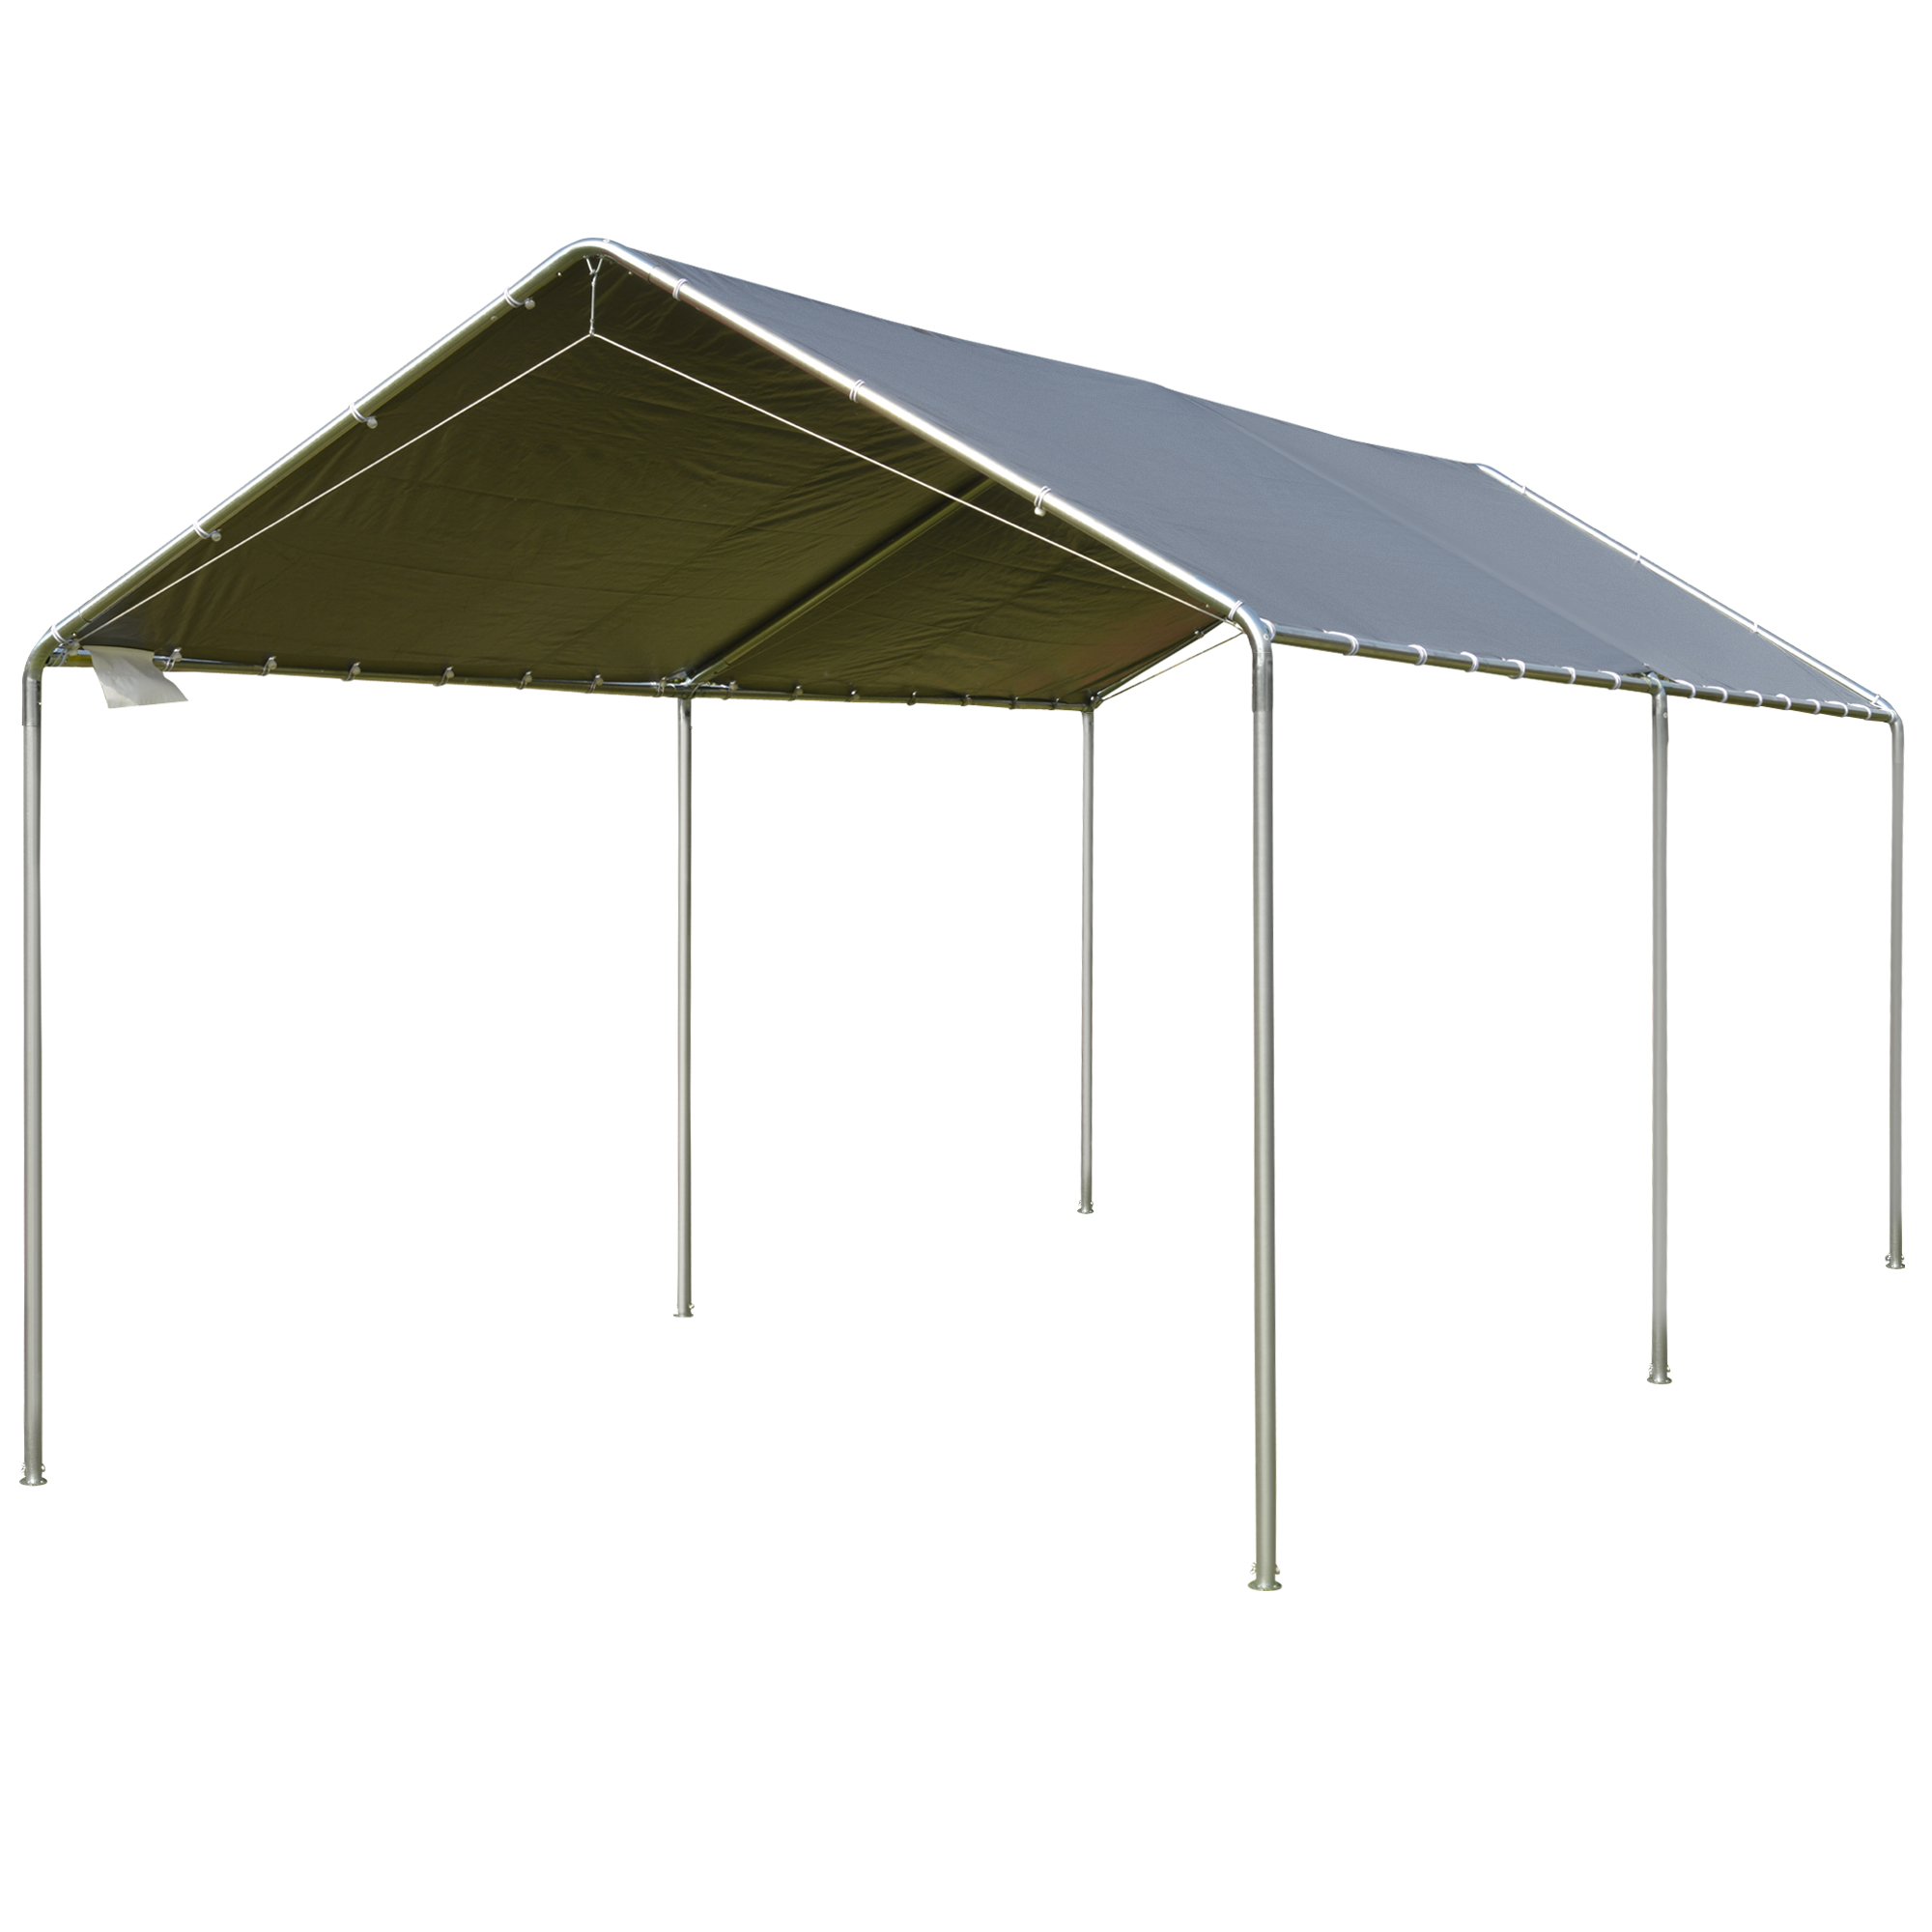 Outsunny 10' x 20' Heavy Duty Carport Awning Canopy with Included Anchor Kit & Weather-Resistant PE Roof - Grey